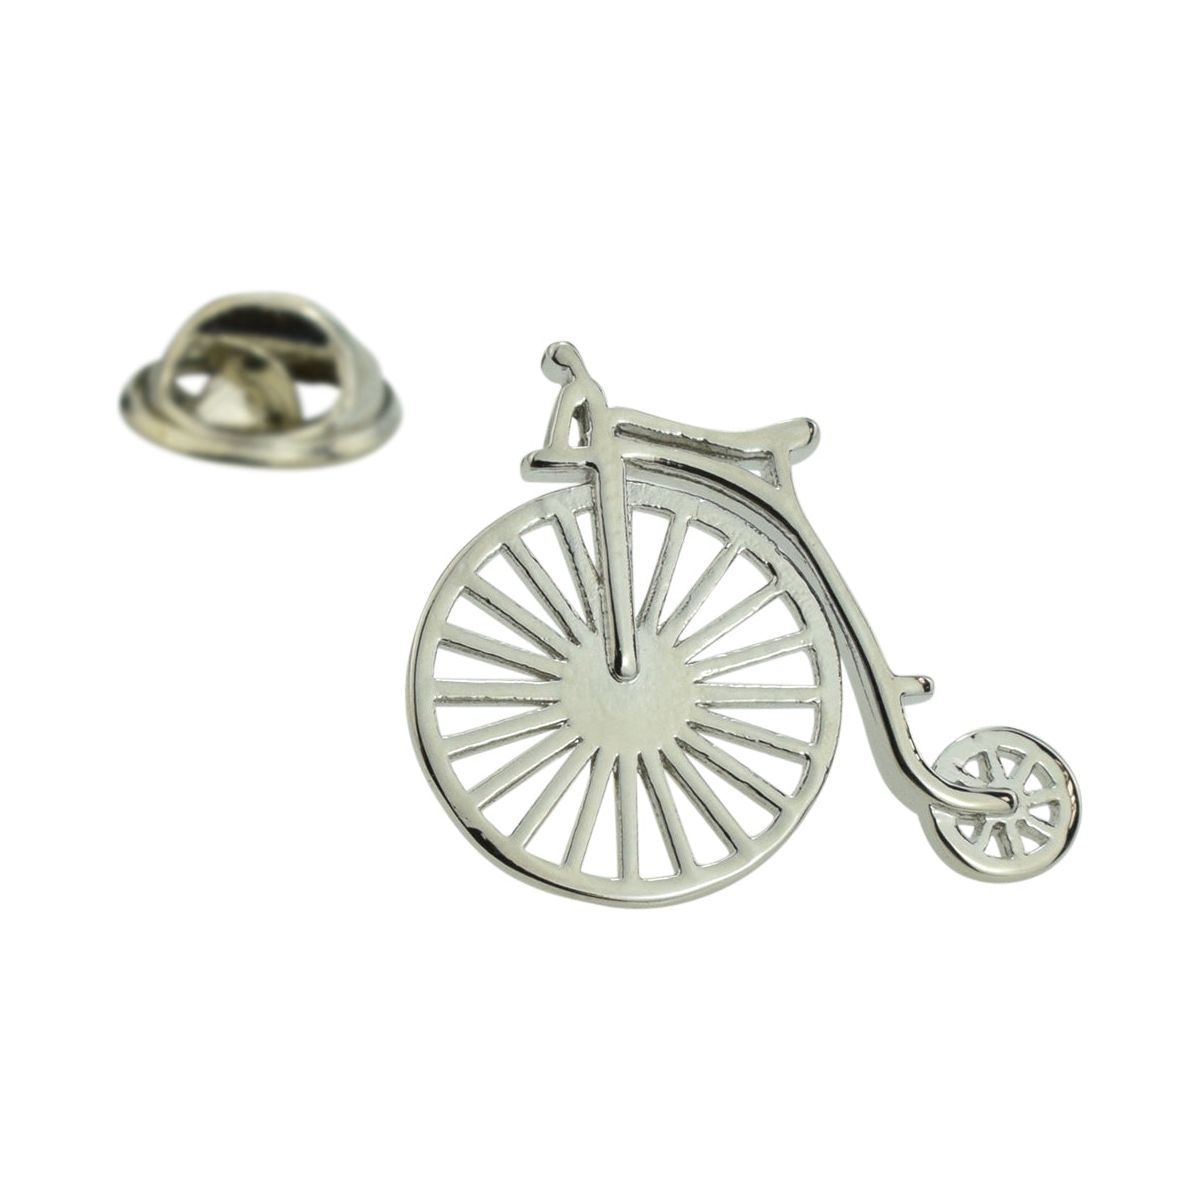 Penny Farthing Lapel Pin Badge - Ashton and Finch